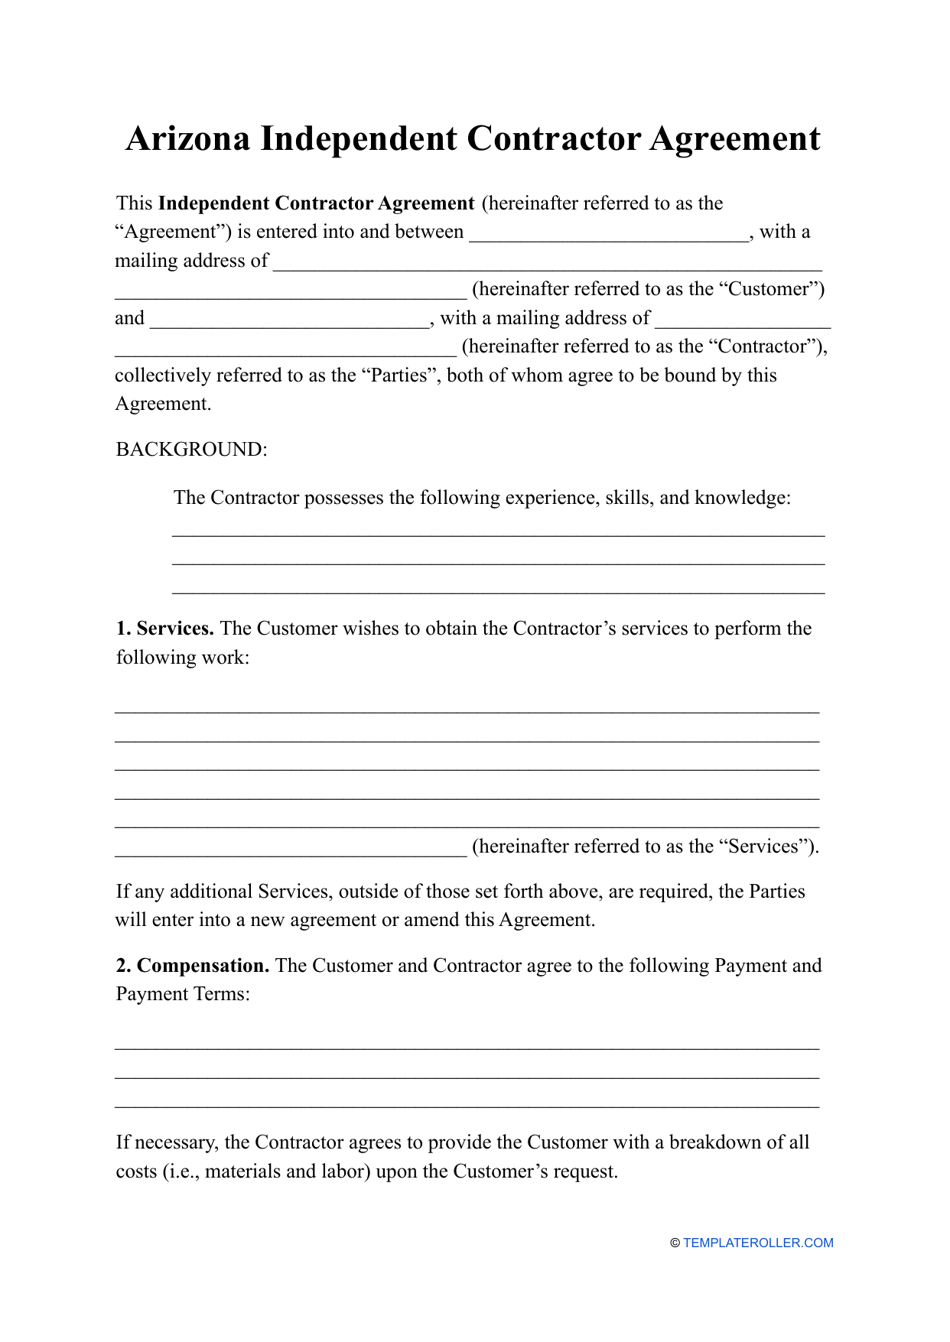 Independent Contractor Agreement Template - Arizona, Page 1